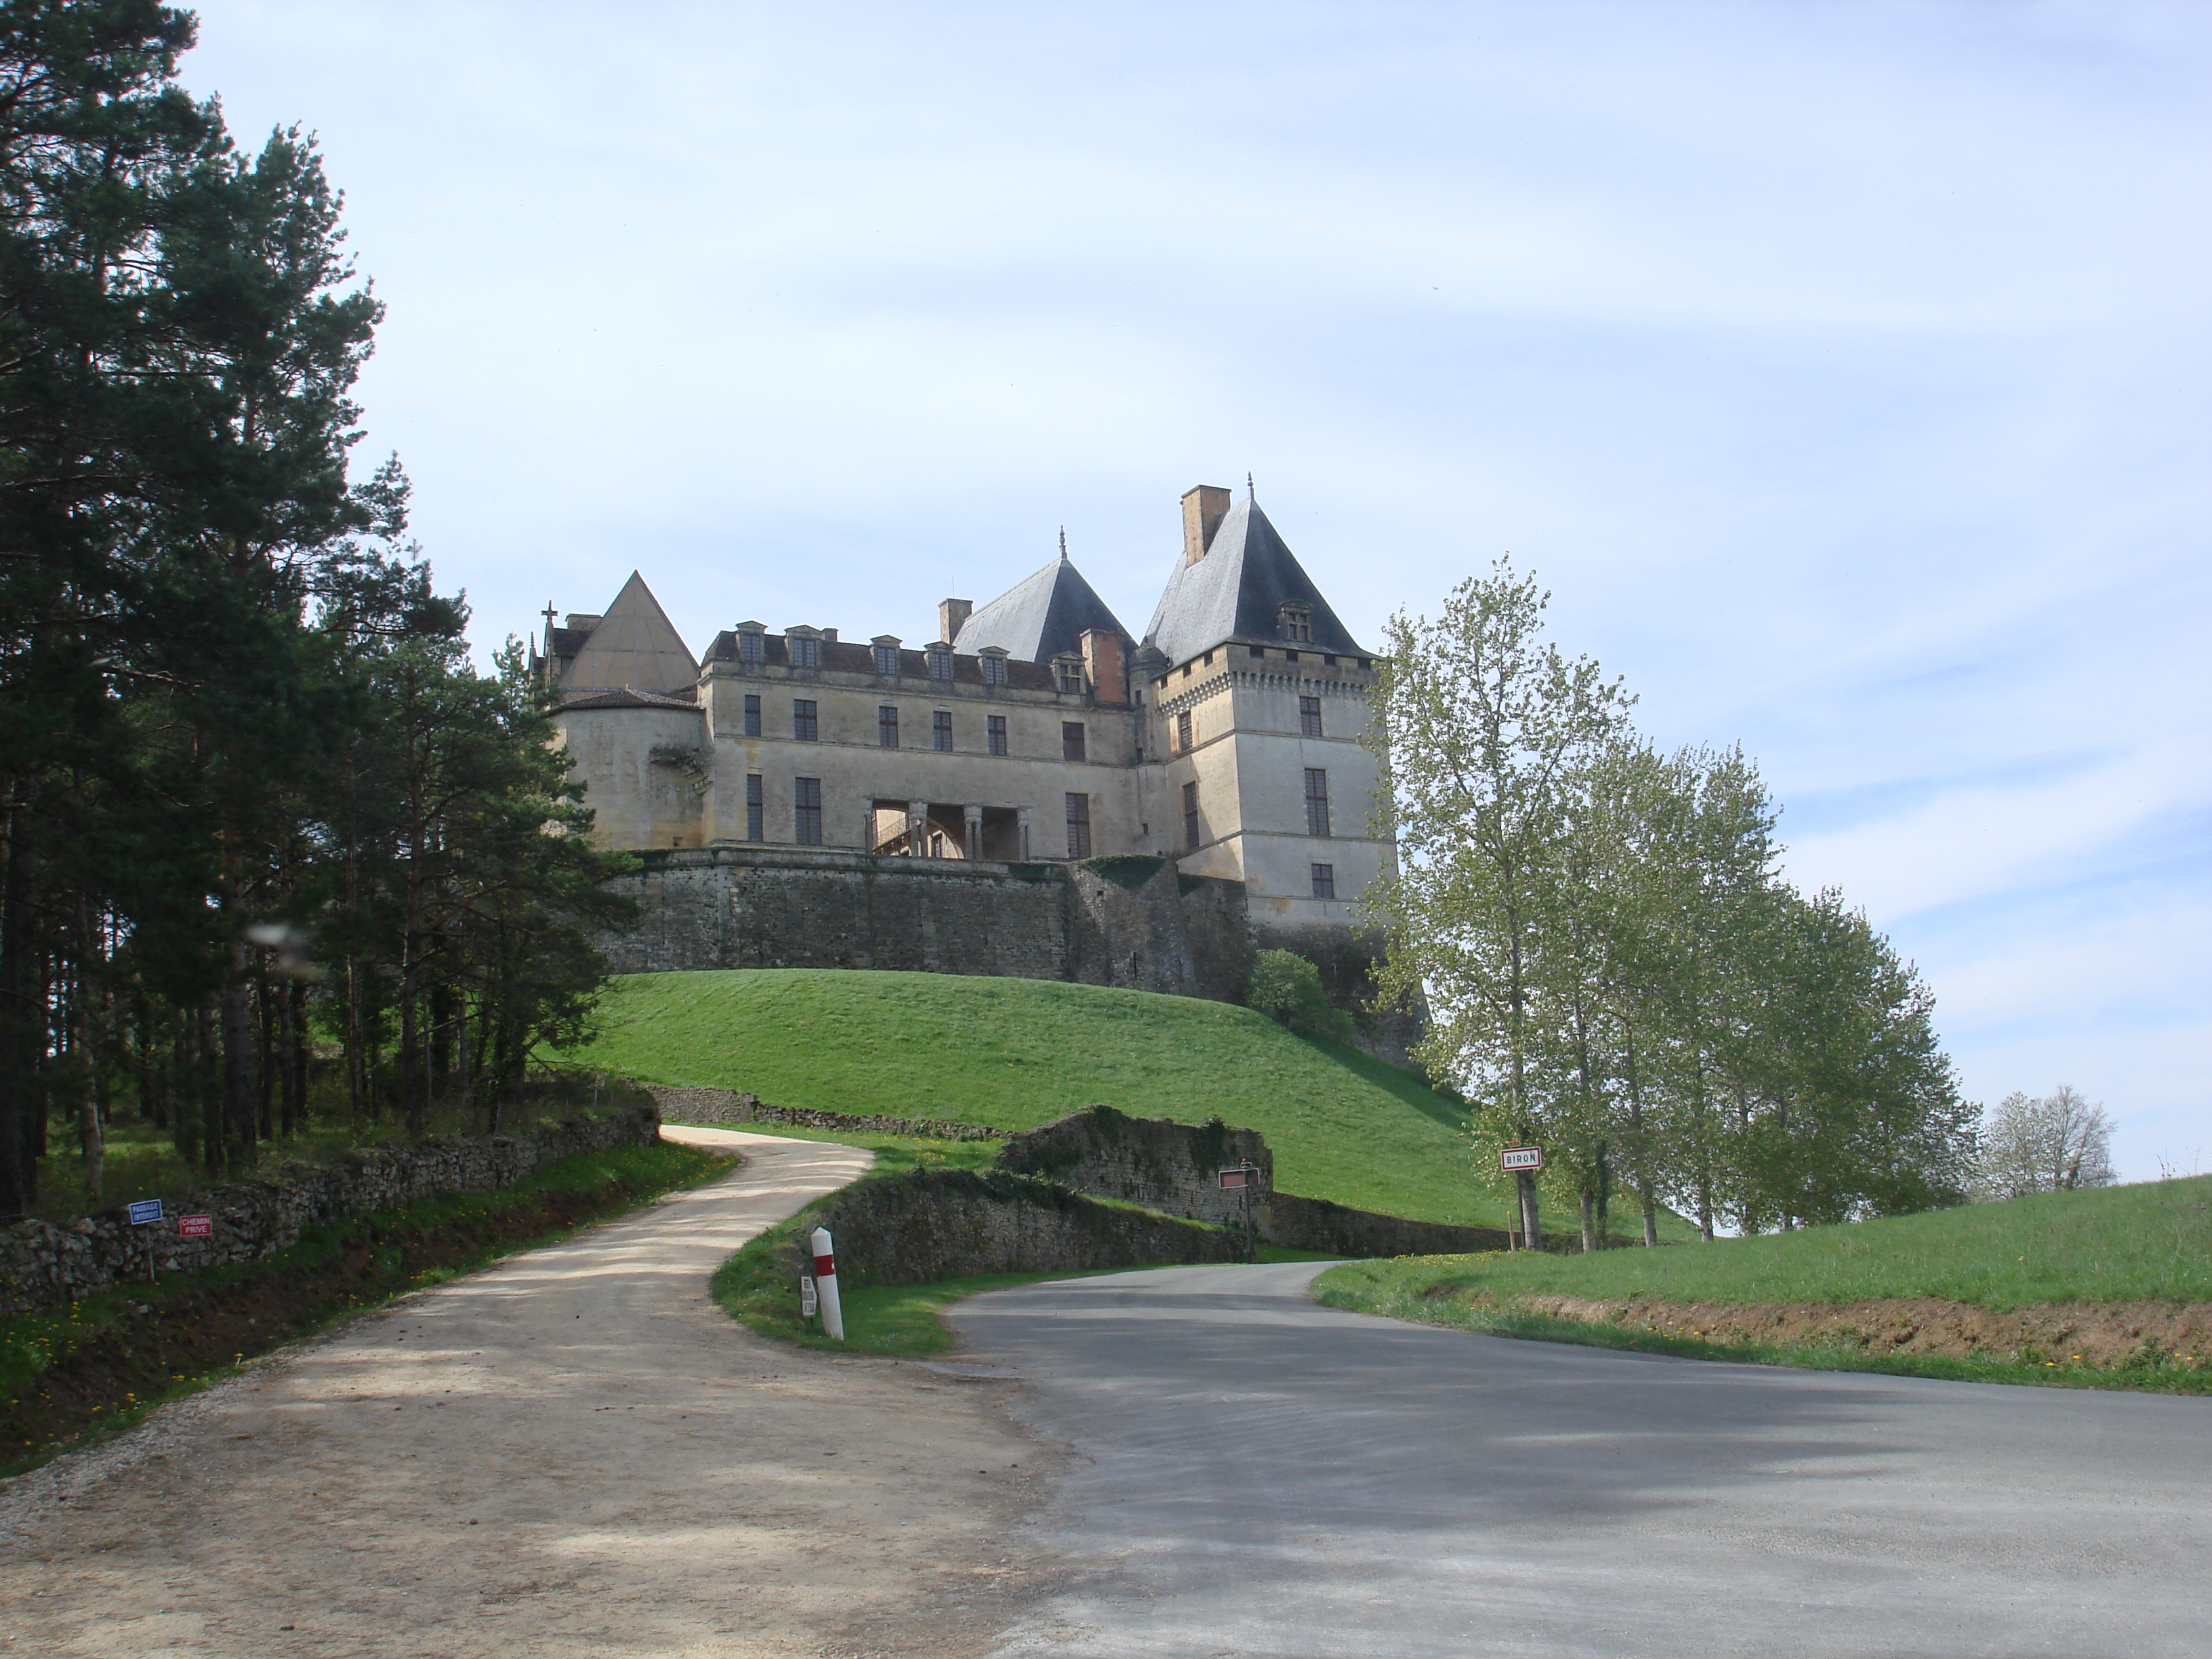 Quercy Chateau June 2011